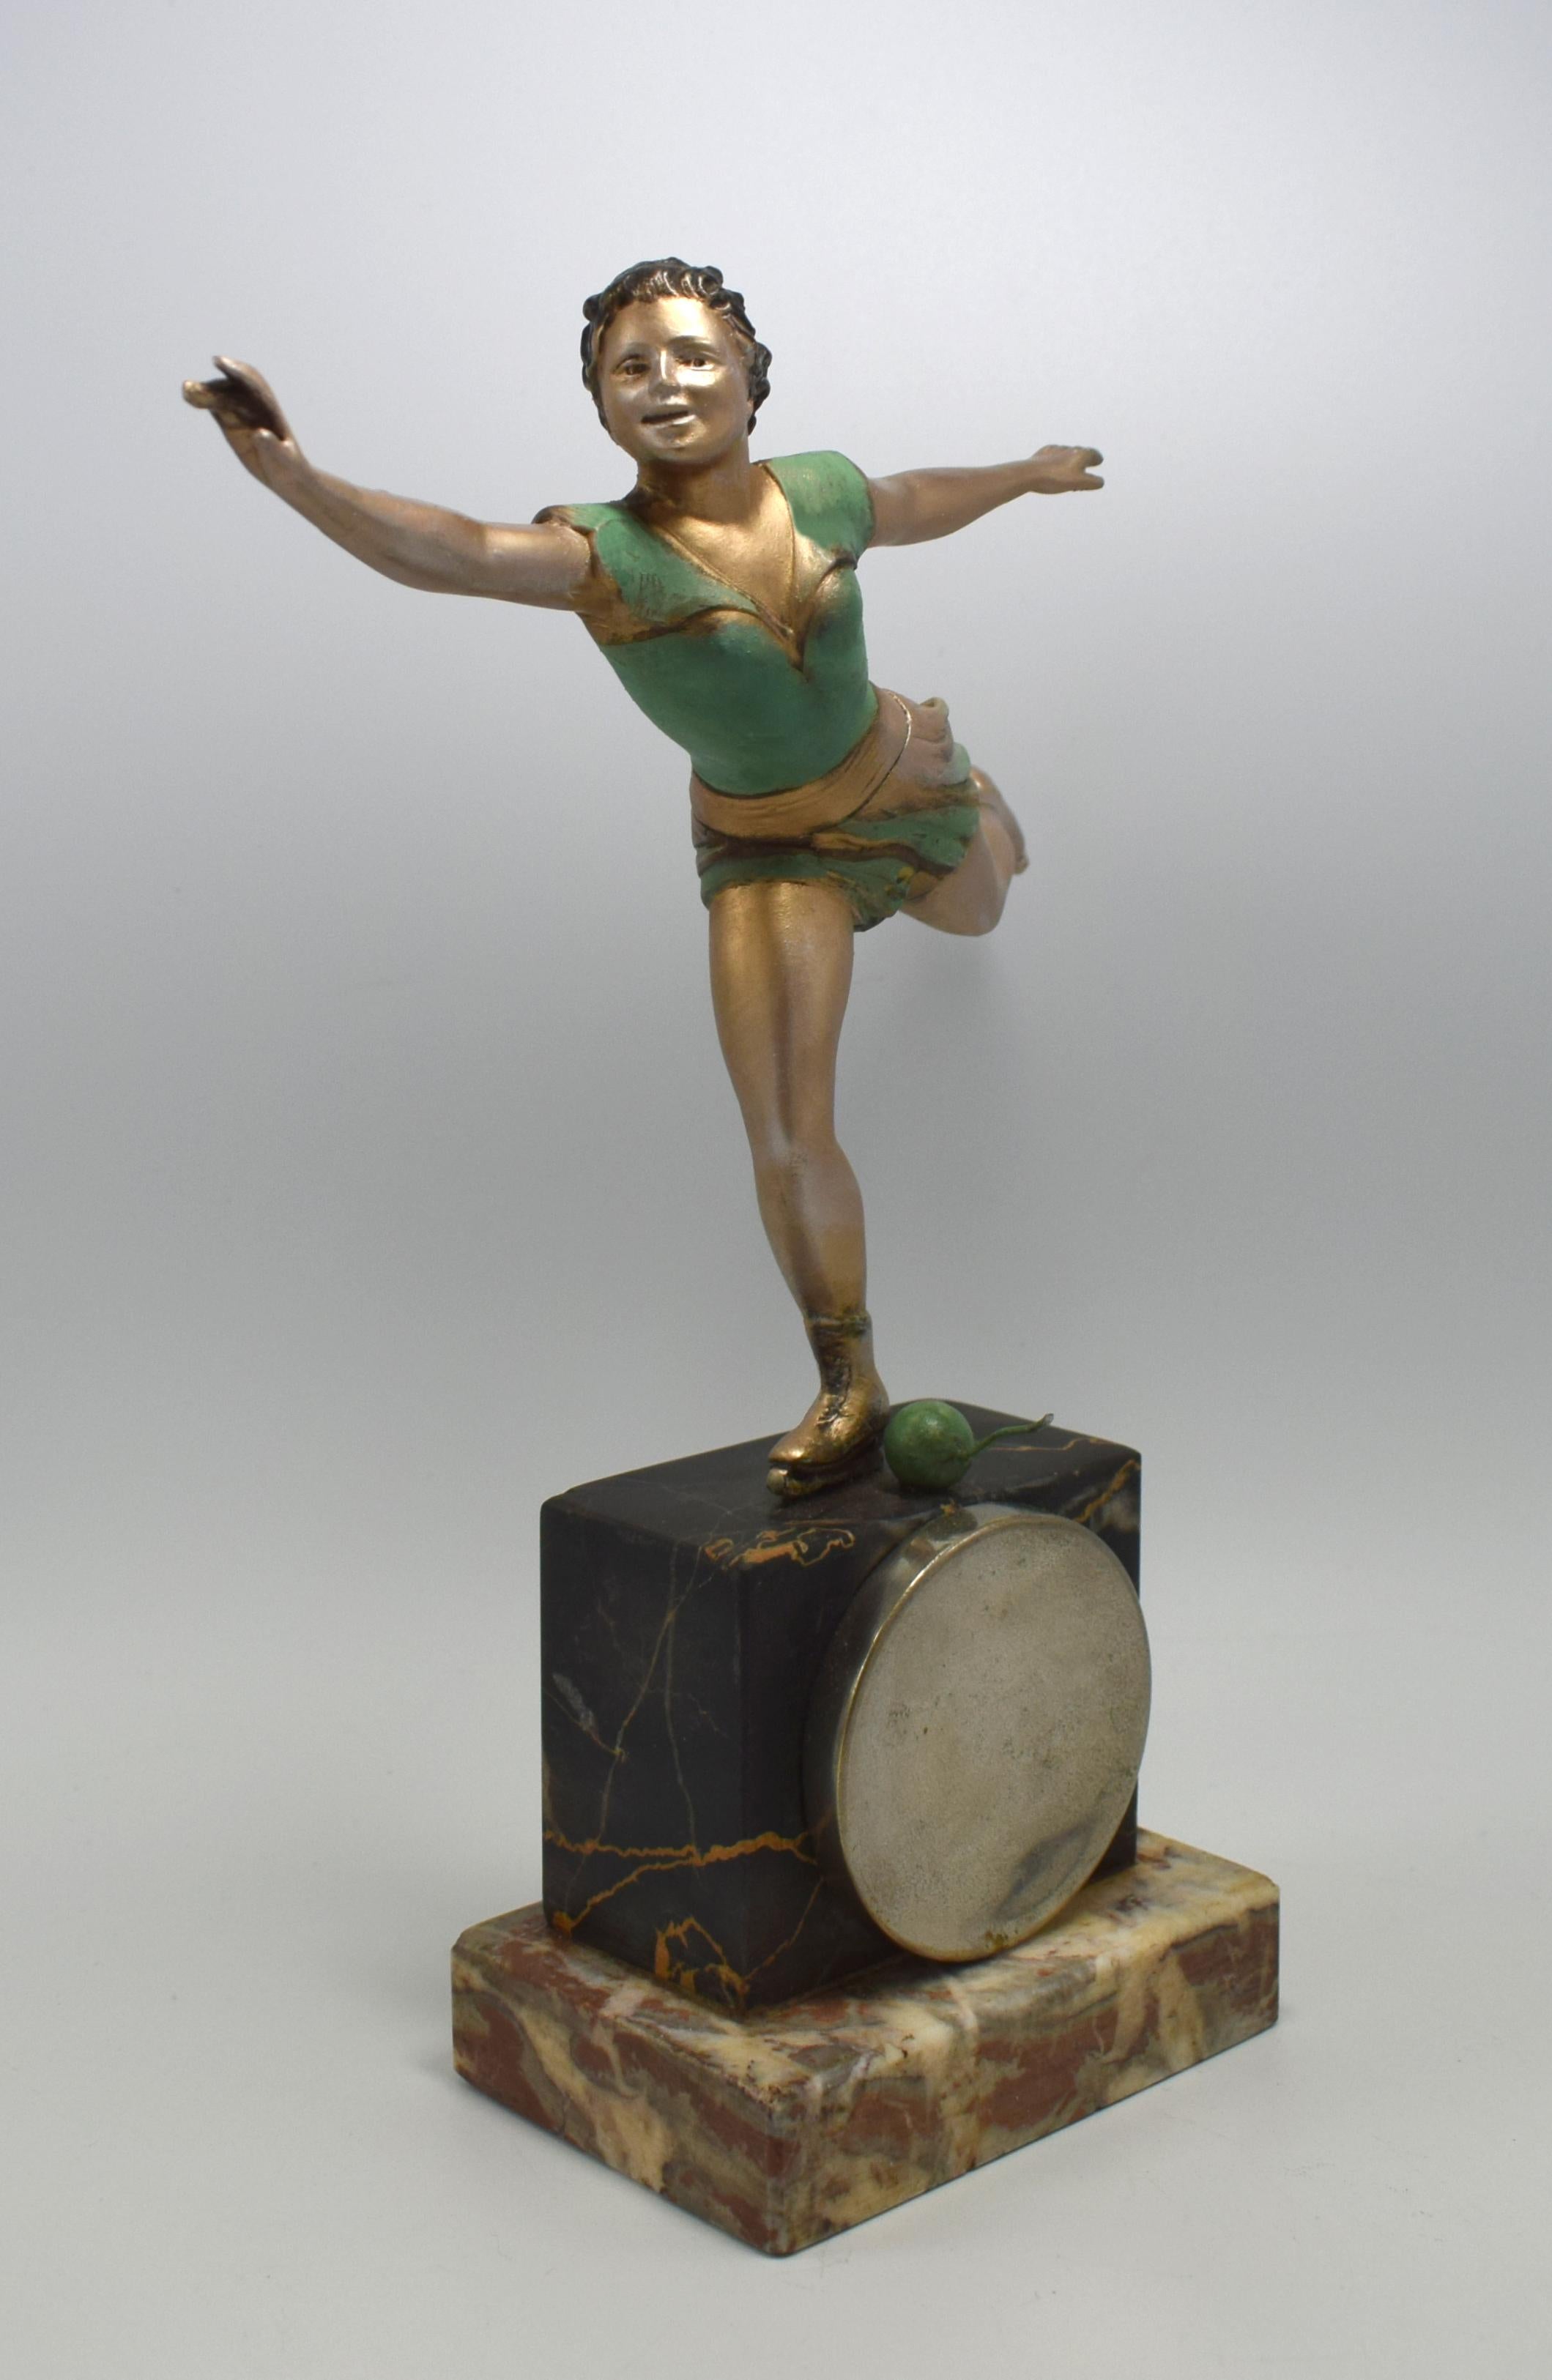 Not often found is this 1930s Art Deco cold painted spelter female skater figure which doubles as a pocket watch stand. The watch suspends from a little wire which protrudes slightly from a ball near her foot. Very well executed with fabulous